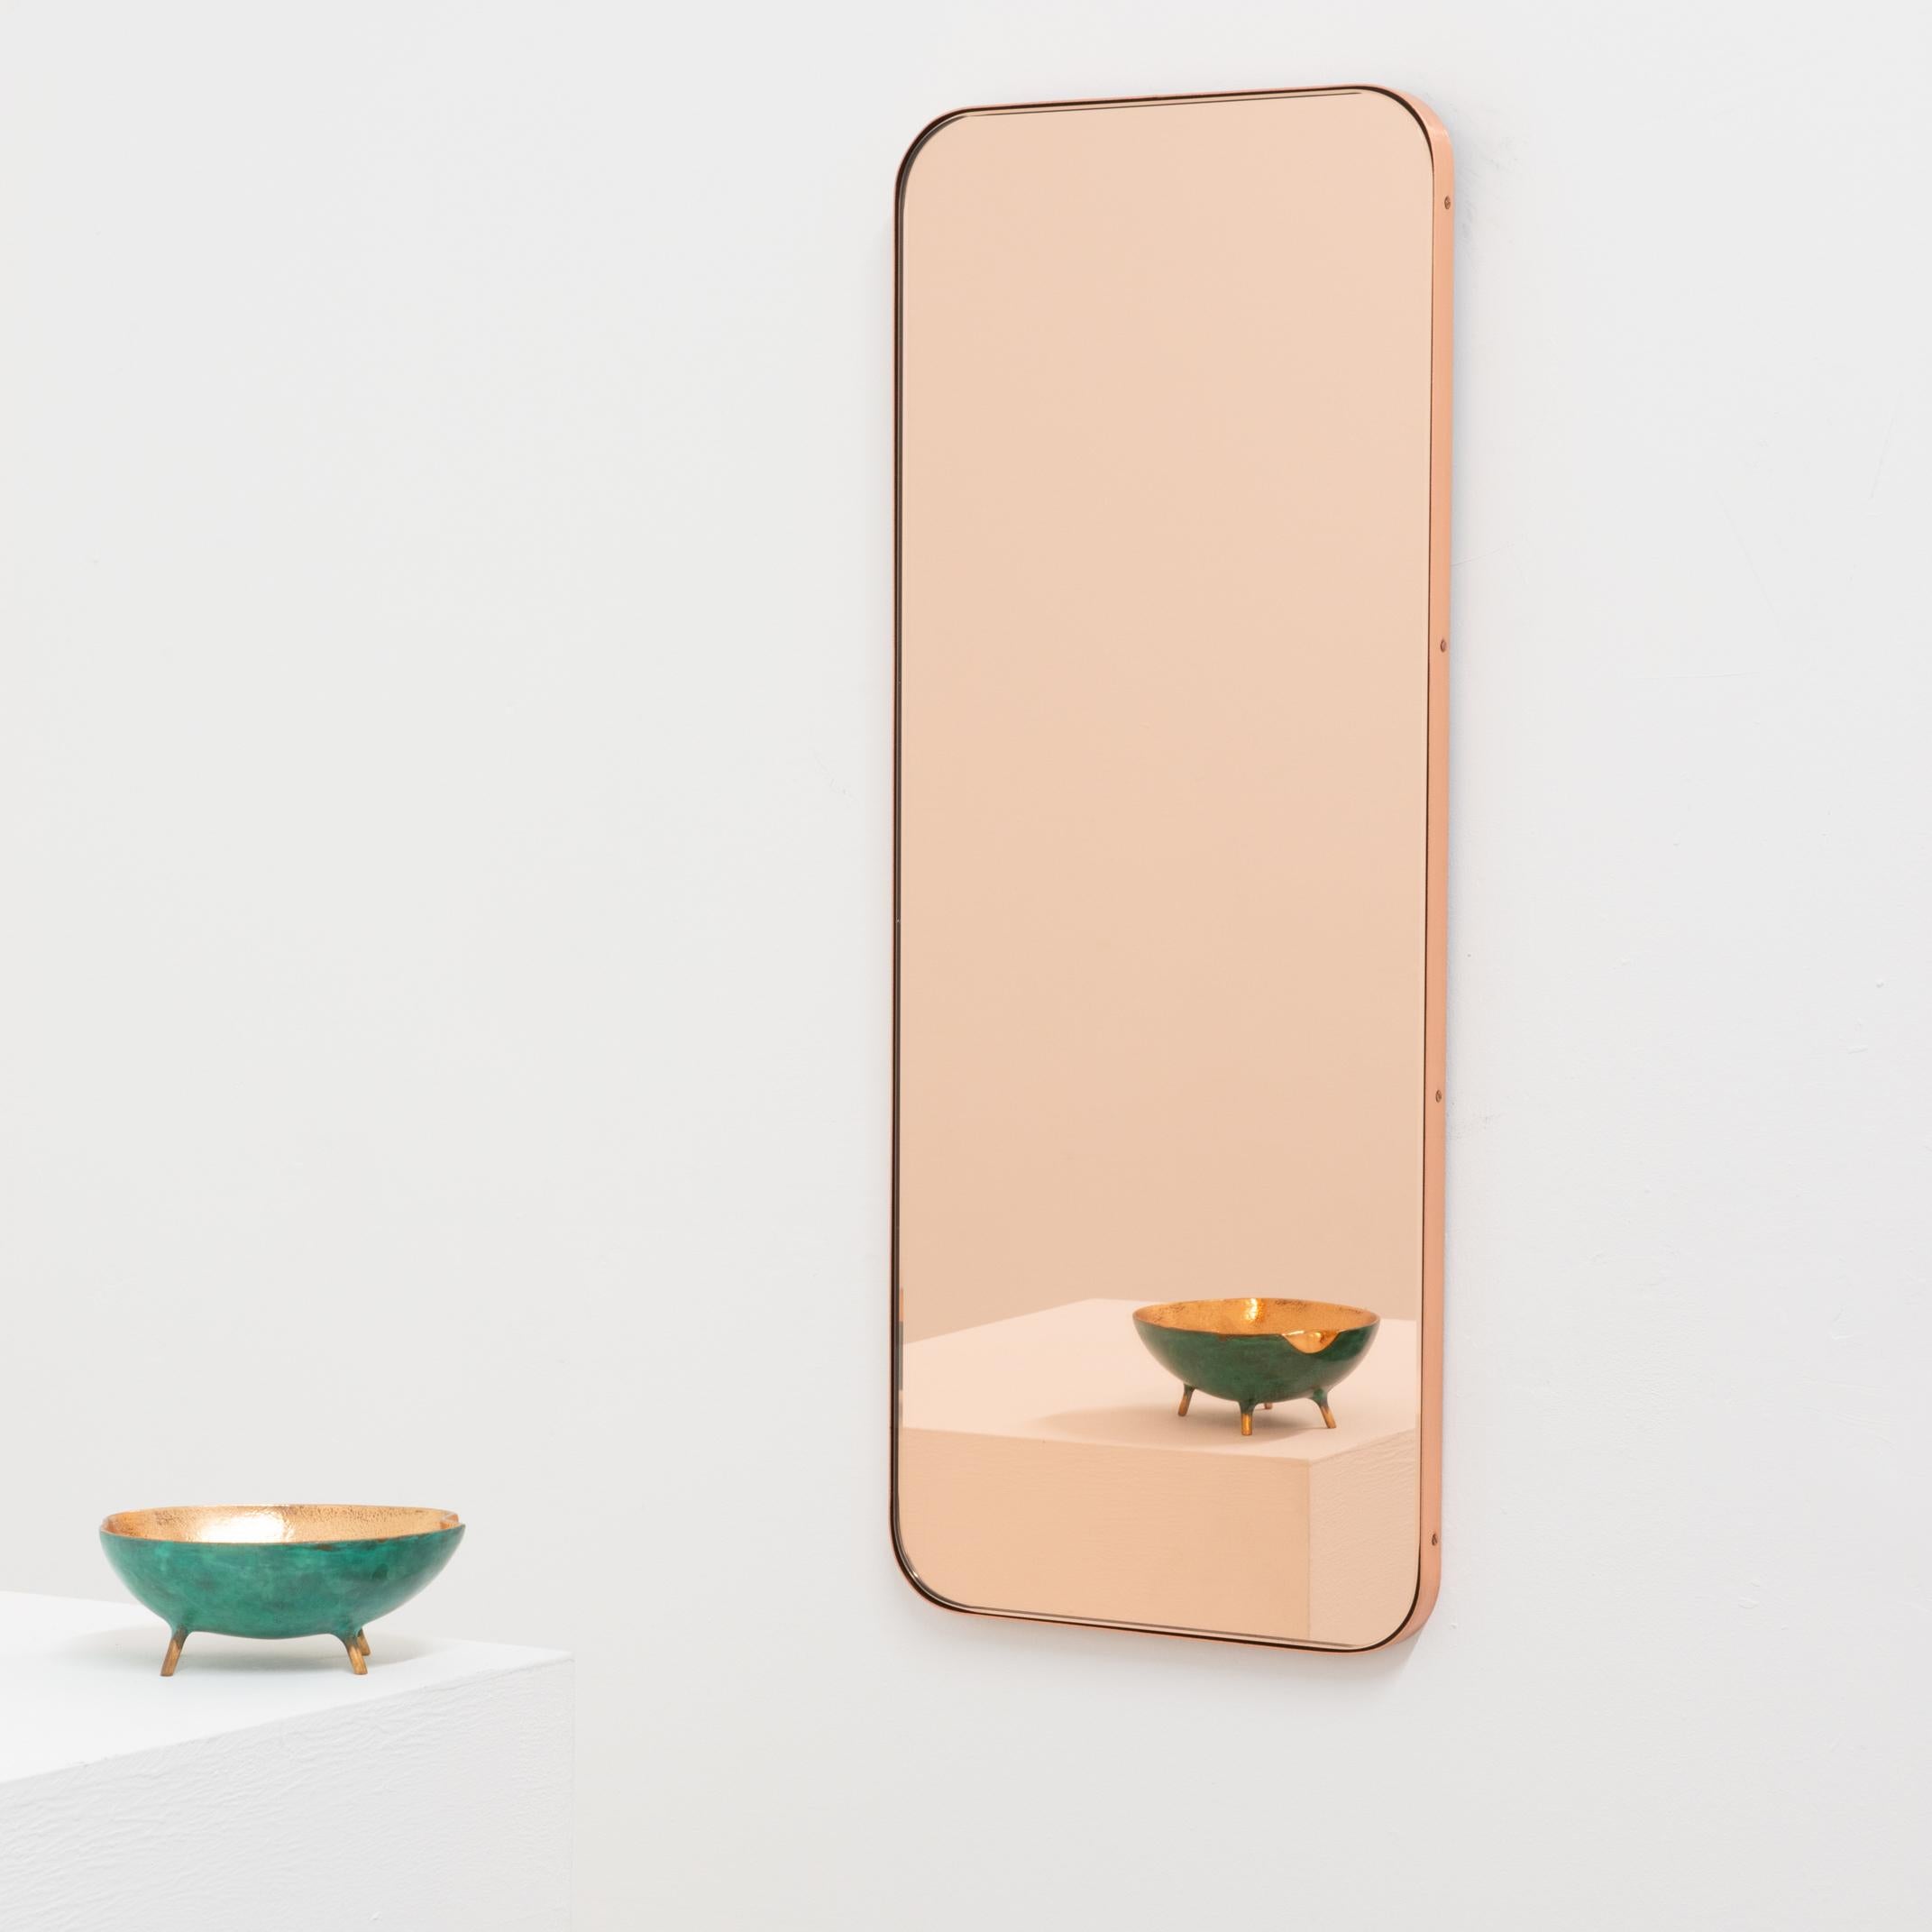 Quadris Rectangular Rose Gold Modern Mirror with a Copper Frame, Medium In New Condition For Sale In London, GB